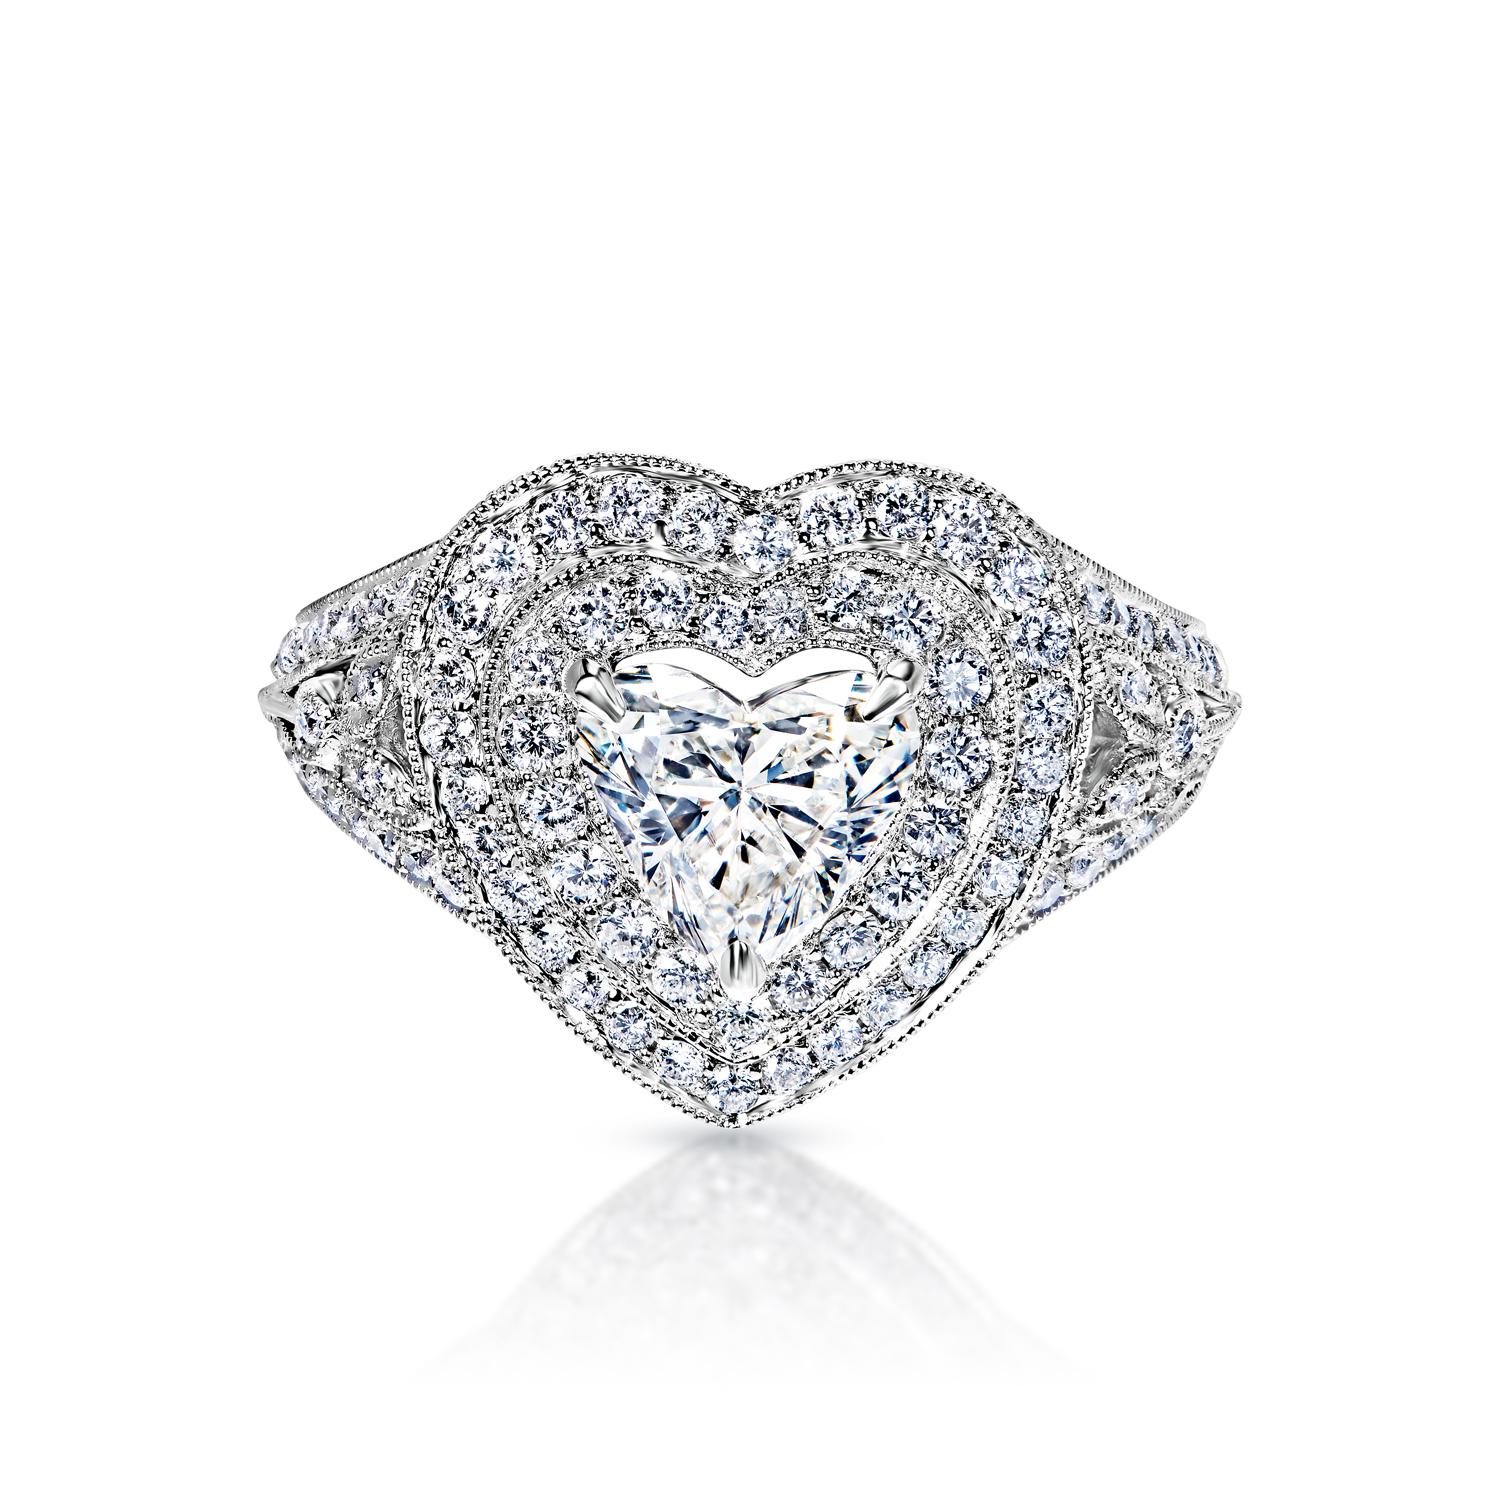 Elaina 3 Carat K SI2 Heart Shape Diamond Engagement Ring in 18k White Gold By Mike Nekta.

 

GIA CERTIFIED
Center Diamond:

Carat Weight: 1.38 Carats
Color : K
Clarity: SI2
Style: Heart Shape

Ring:
Settings: Double Halo, Split Shank, 3 Claw